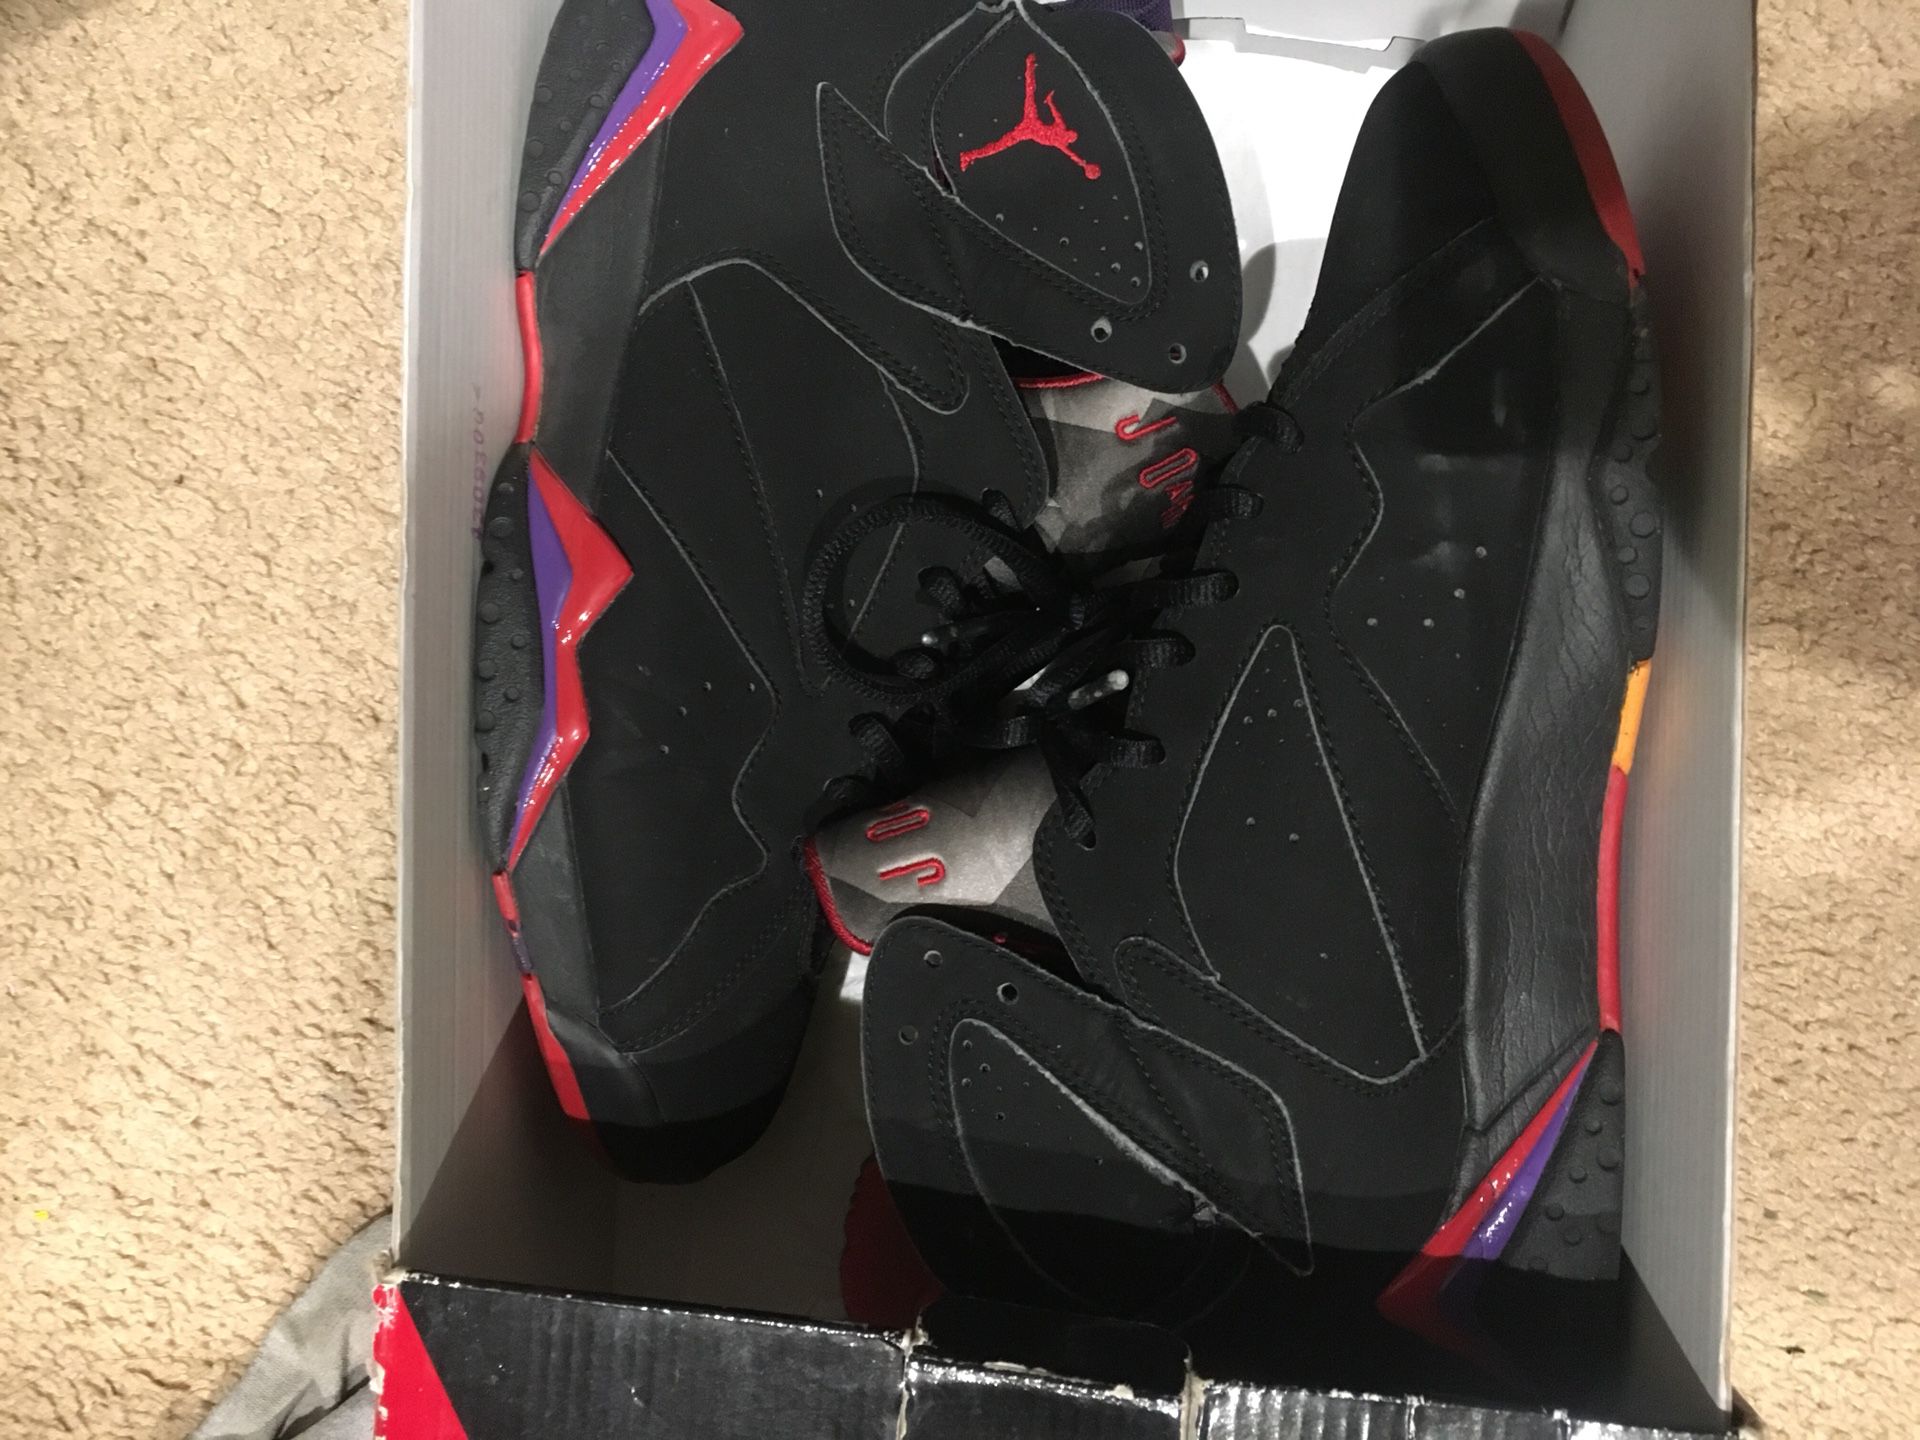 Raptor 7s size 9 cond 9/10